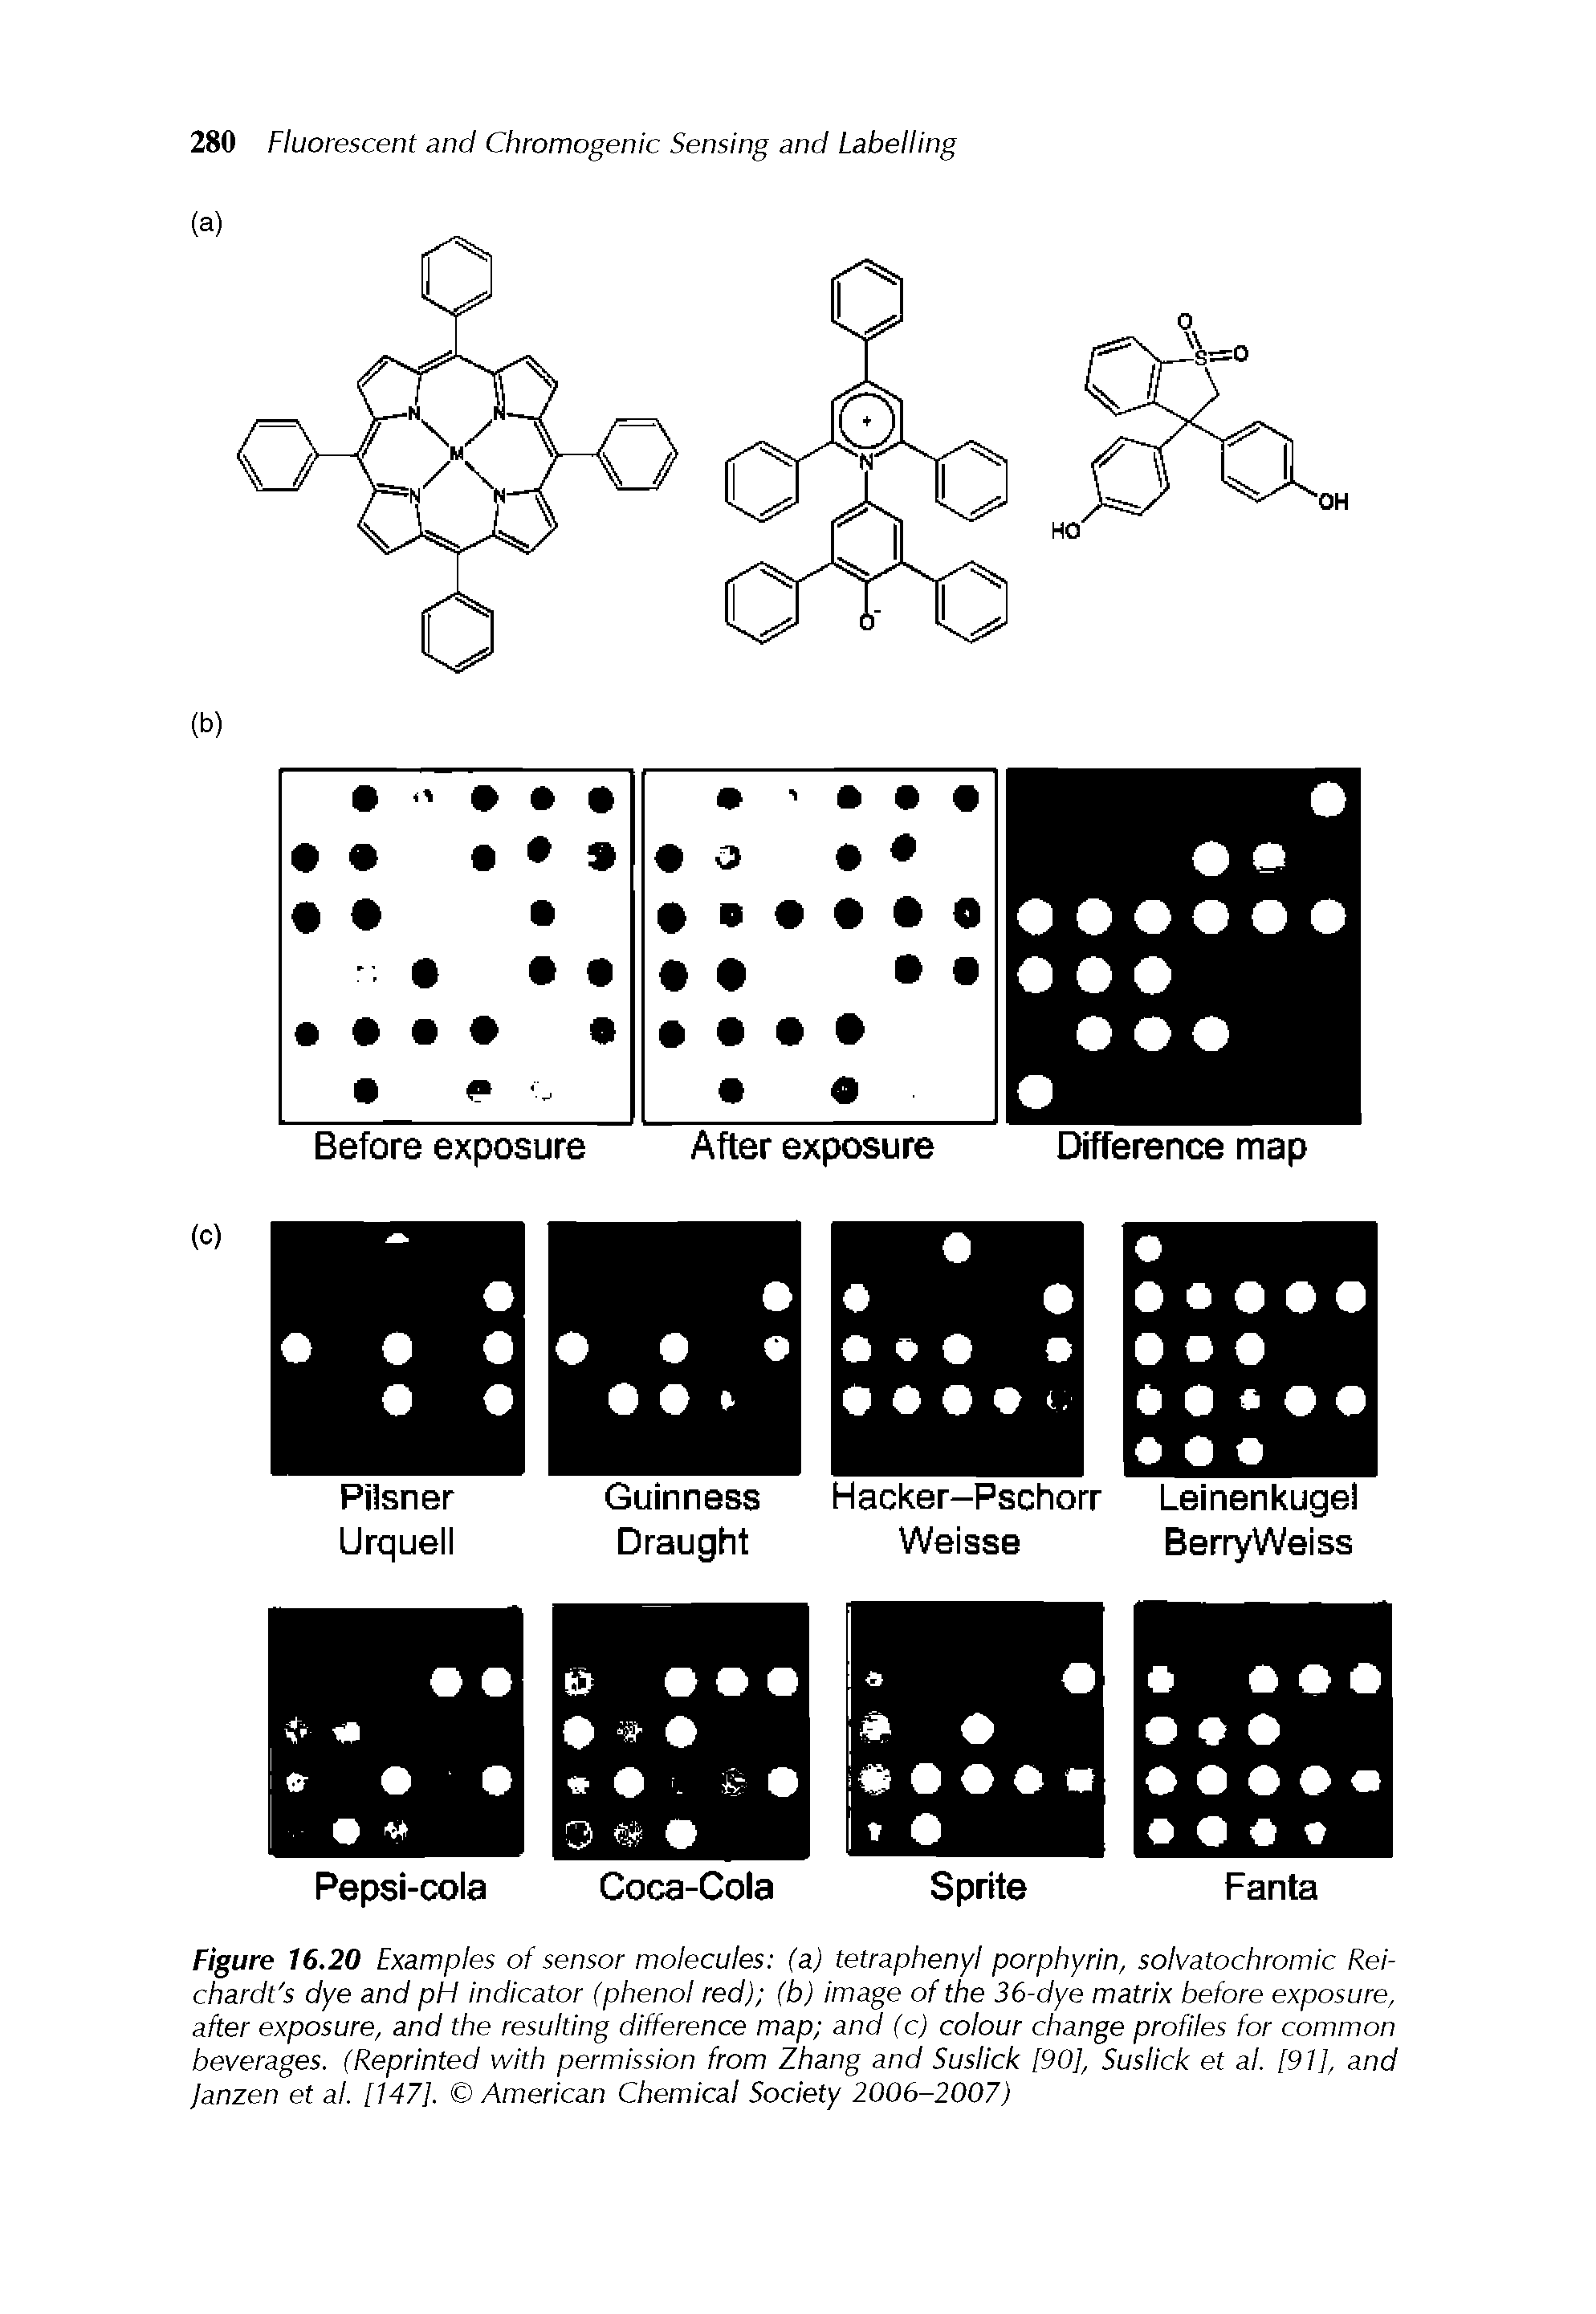 Figure 16.20 Examples of sensor molecules (a) tetraphenyl porphyrin, solvatochromic Rei-chardt s dye and pH indicator (phenol red) (b) image of the 36-dye matrix before exposure, after exposure, and the resulting difference map and (c) colour change profiles for common beverages. (Reprinted with permission from Zhang and Suslick [90], Suslick et at. [91], and Janzen et al. [147]. American Chemical Society 2006-2007)...